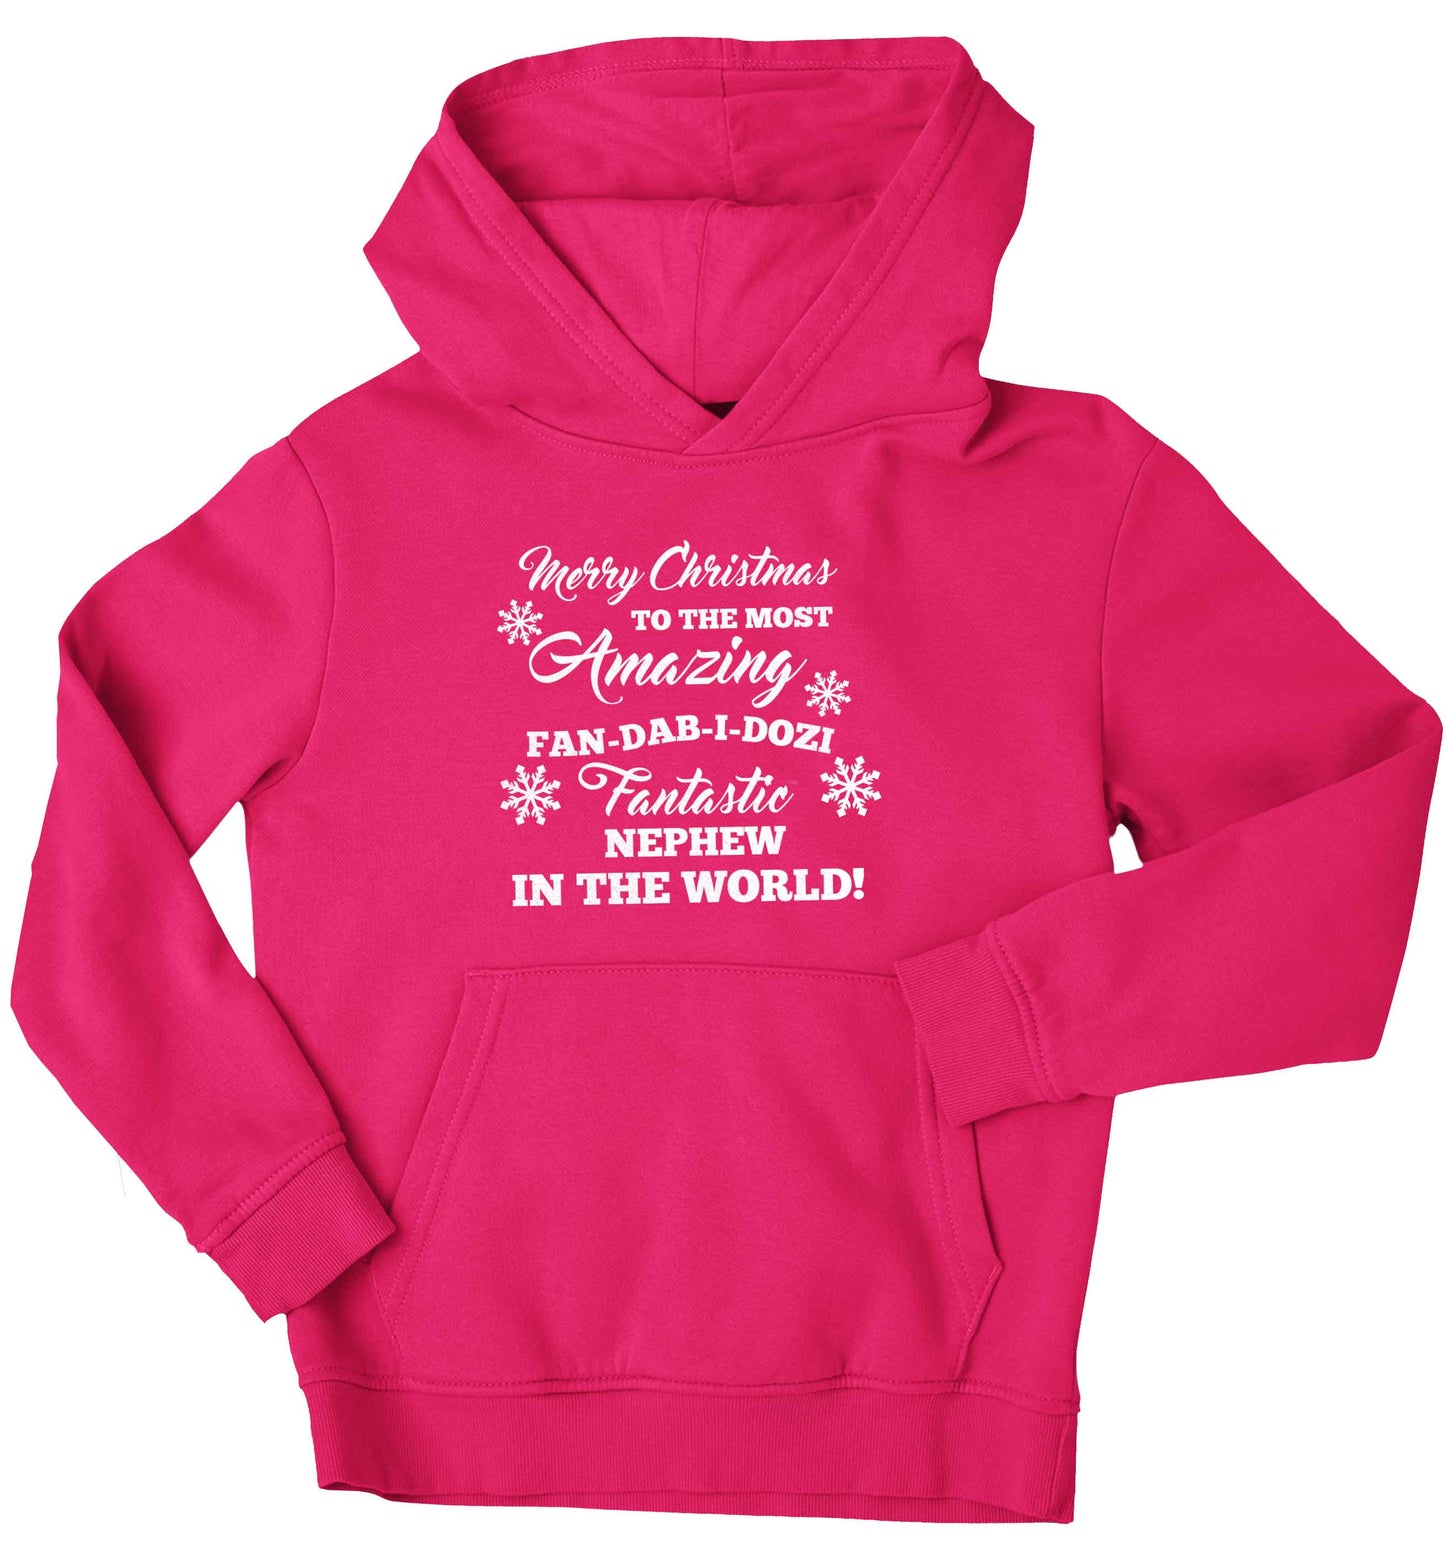 Merry Christmas to the most amazing fan-dab-i-dozi fantasic Nephew in the world children's pink hoodie 12-13 Years